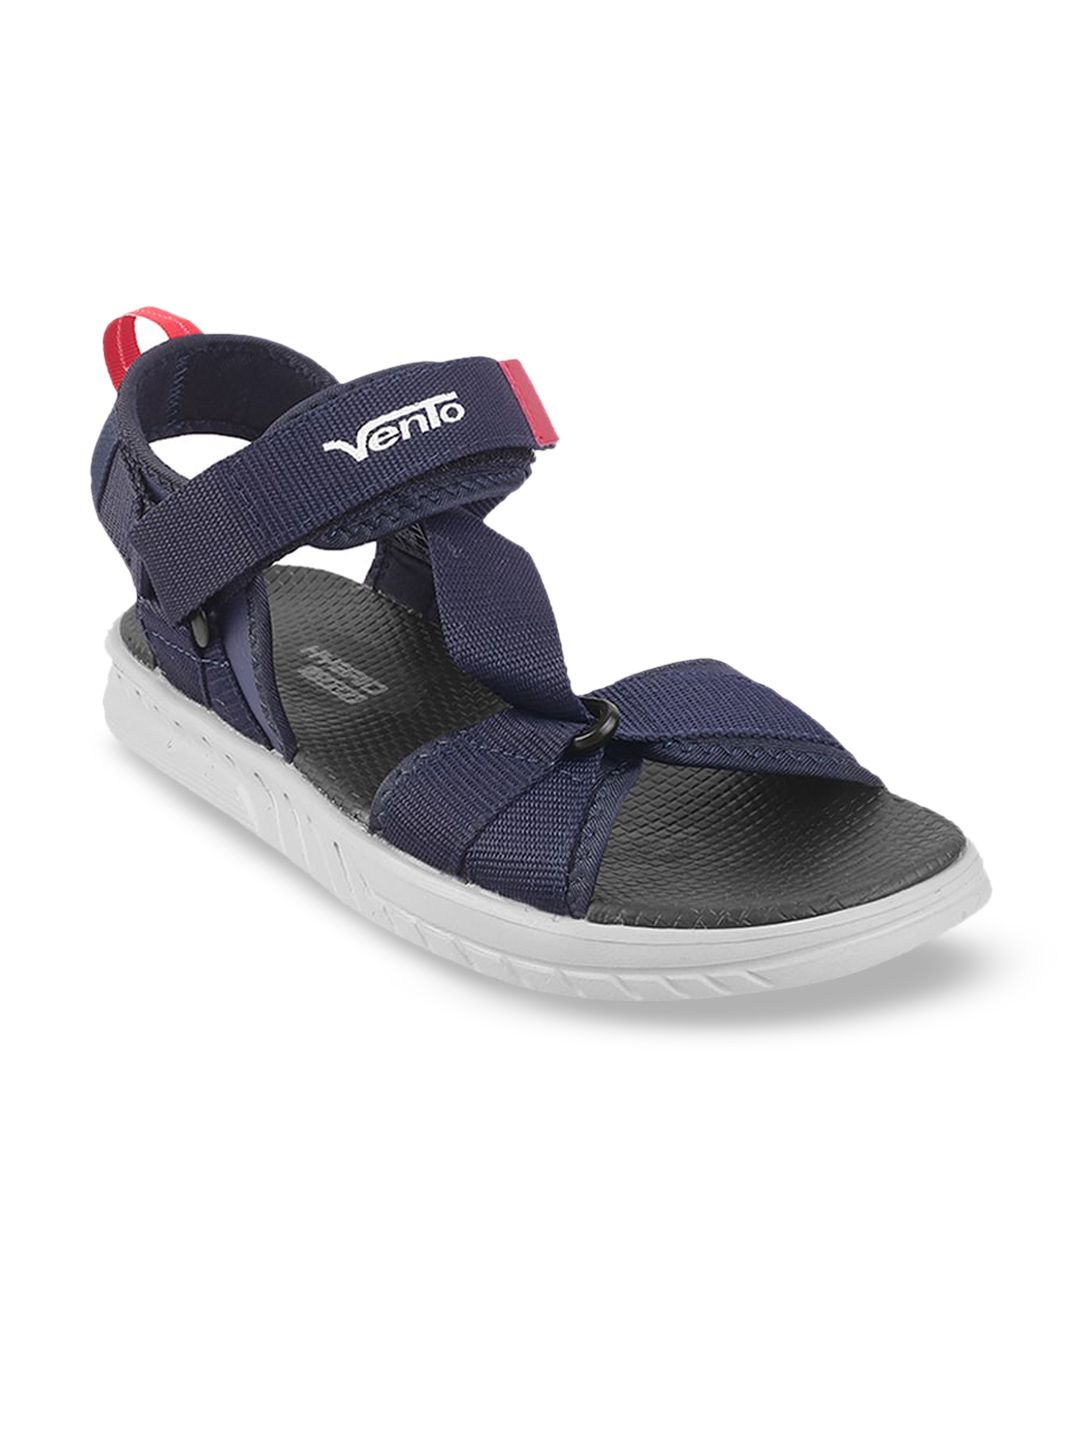 Vento Navy Blue & Red Solid Sports Sandal Price in India